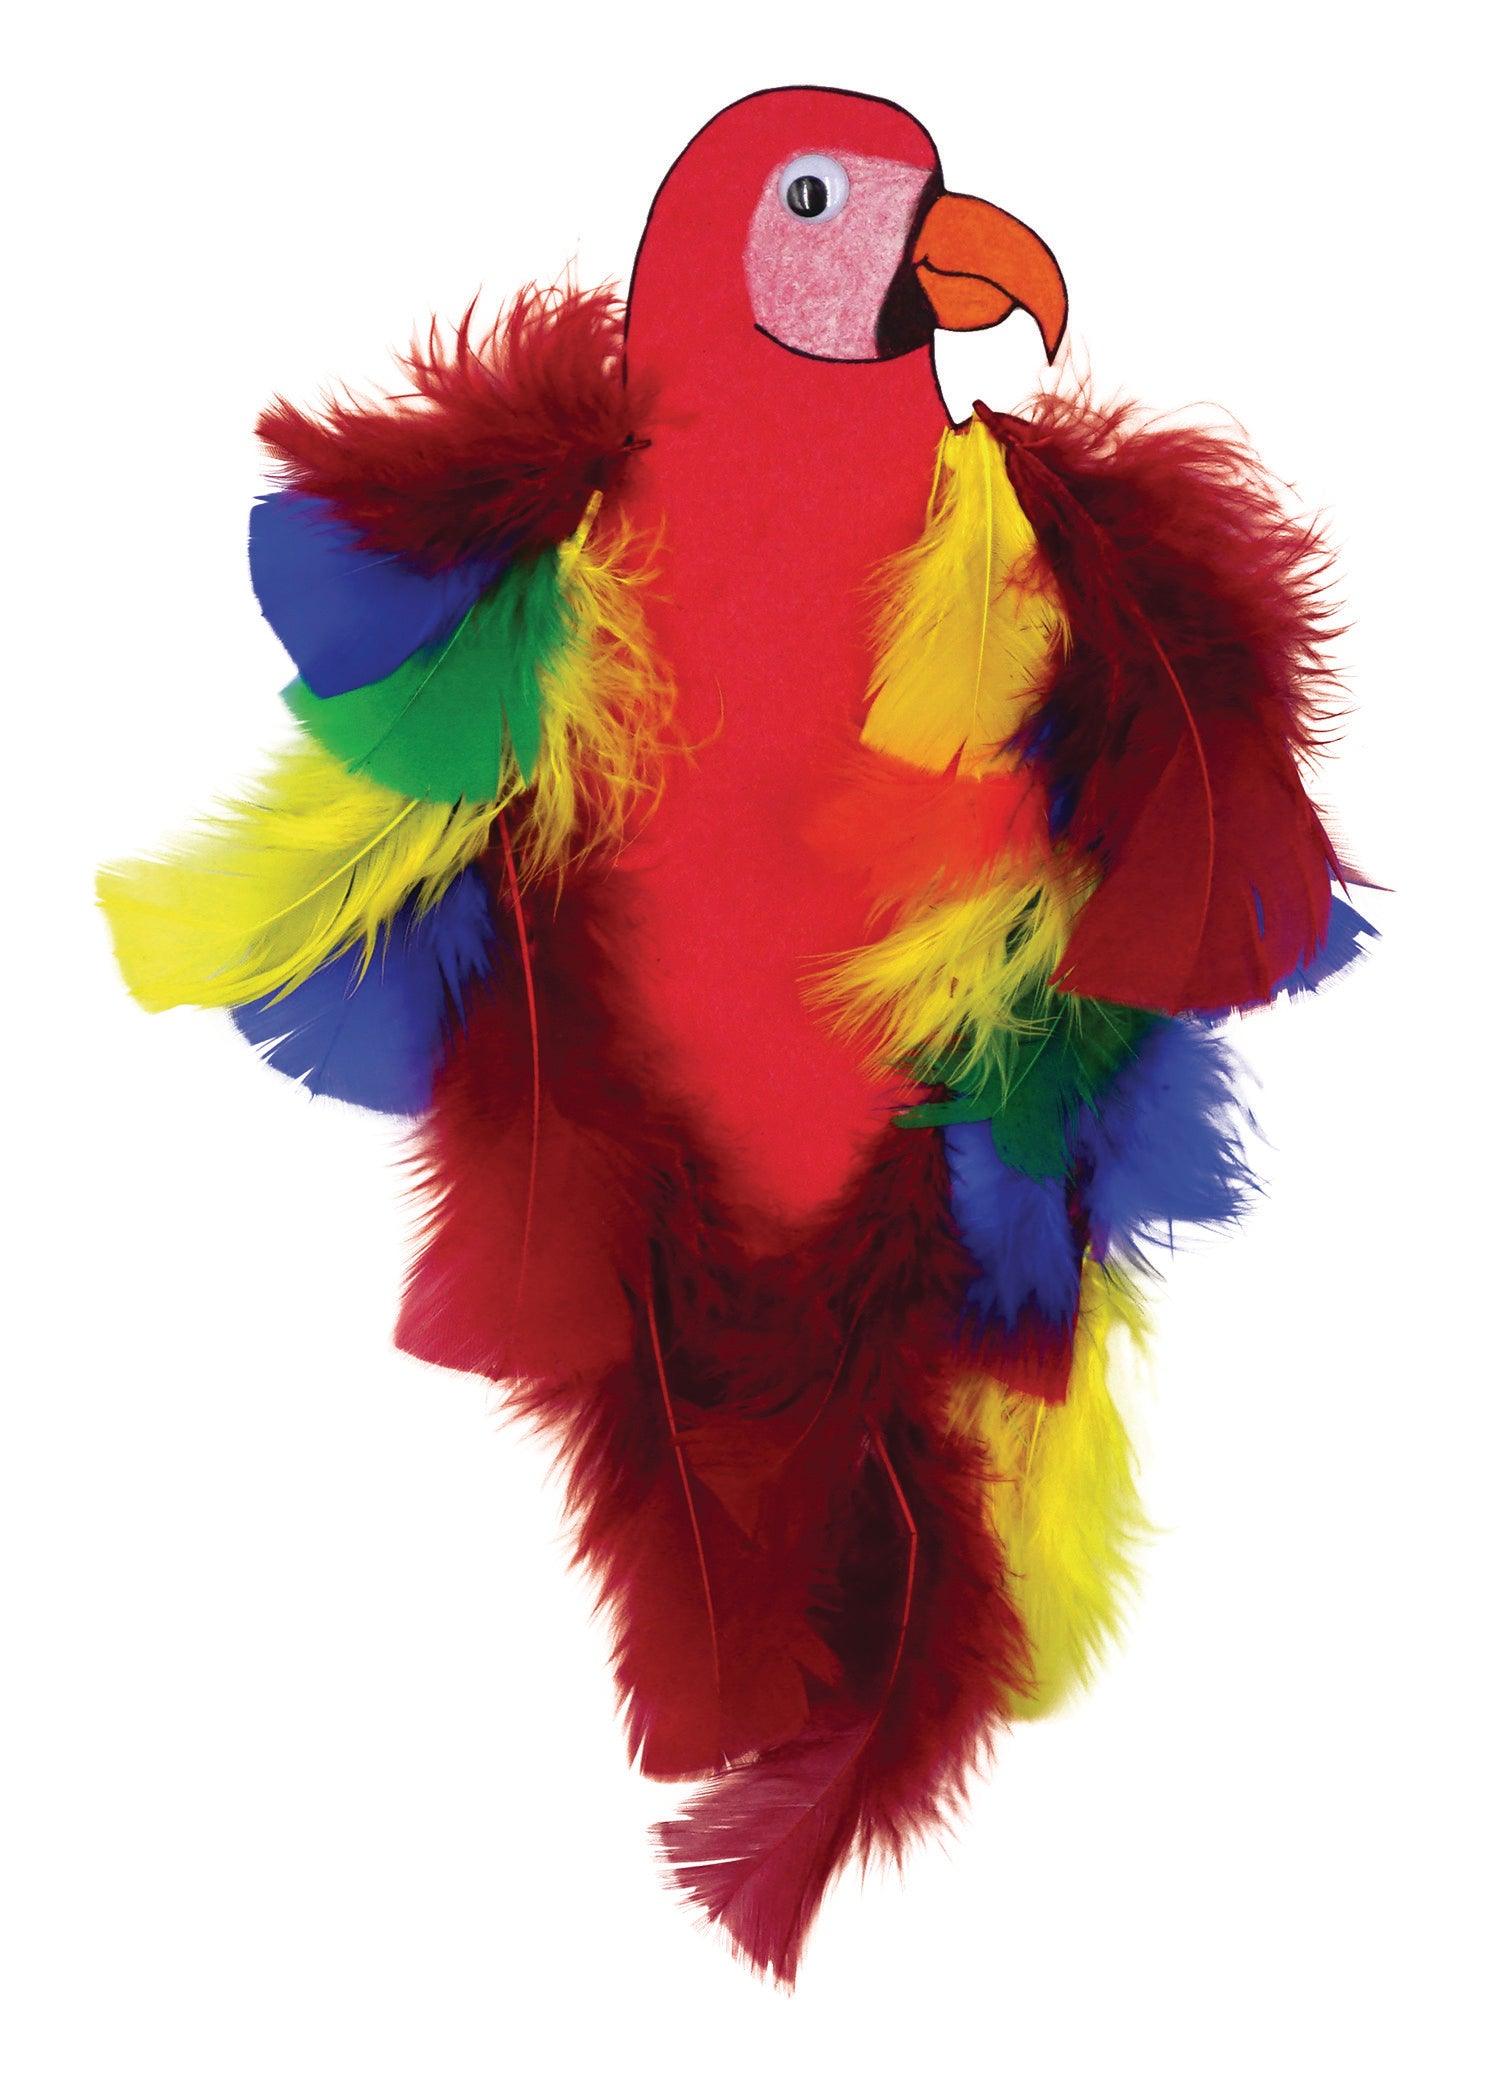 Turkey Plumage Feathers, Bright Hues Assorted, Assorted Sizes, 1 oz. Per Bag, 6 Bags - Loomini